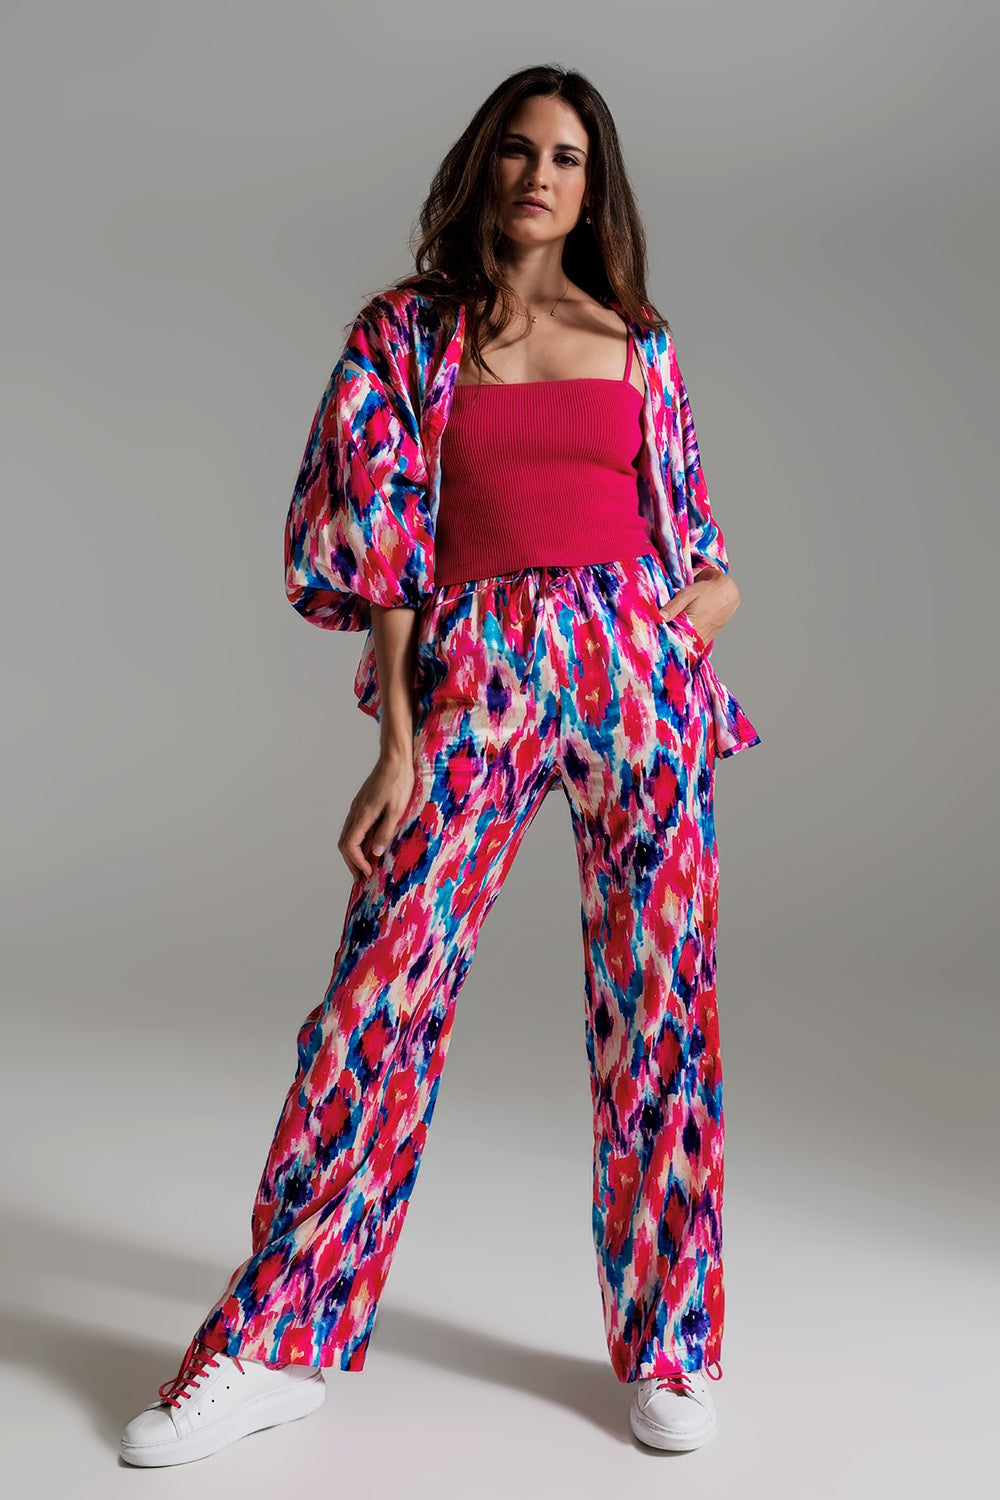 Palazzo Style Pants in Abstract Pink and Blue Print - Szua Store